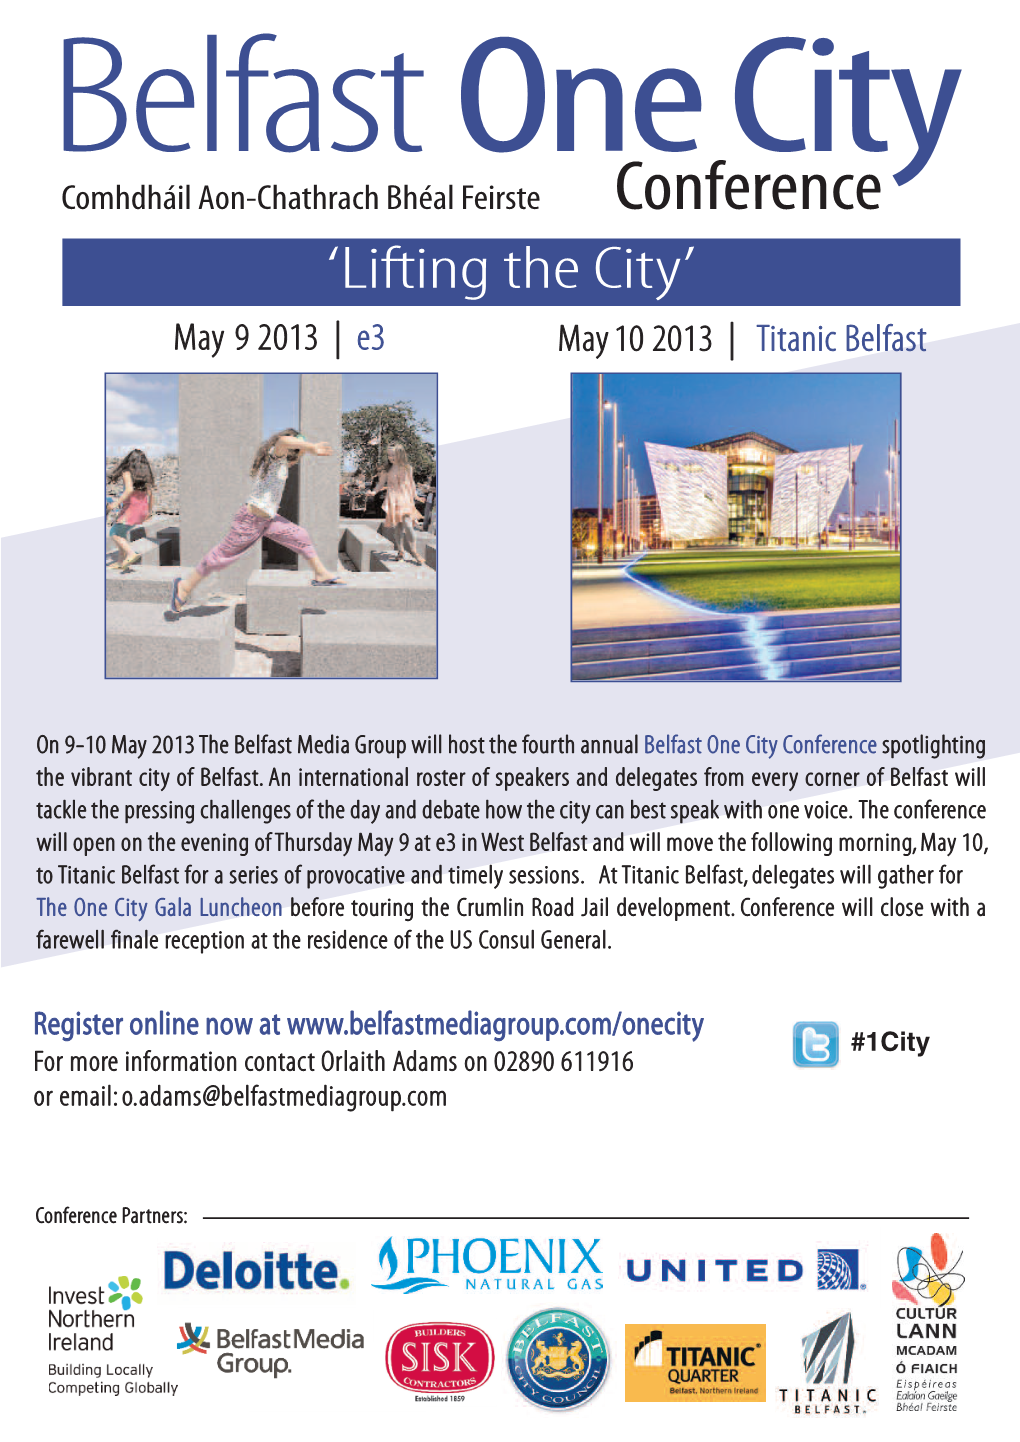 Conference ‘Lifting the City’ May 9 2013 | E3 May10 2013 | Titanic Belfast